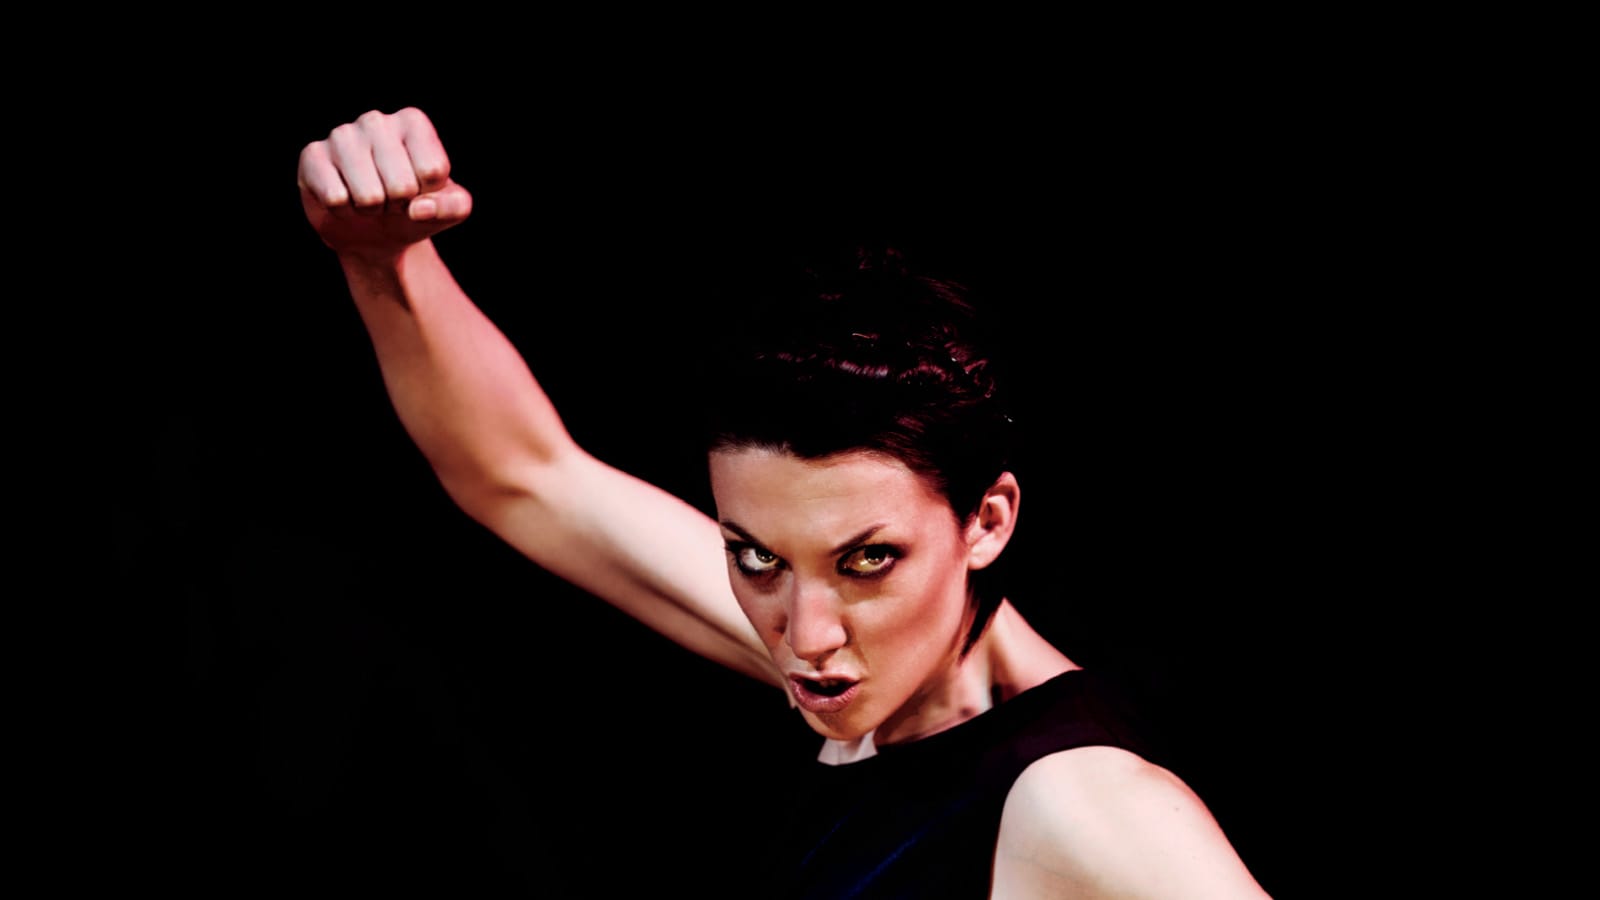 A woman wearing all black holding her fist up aggressively